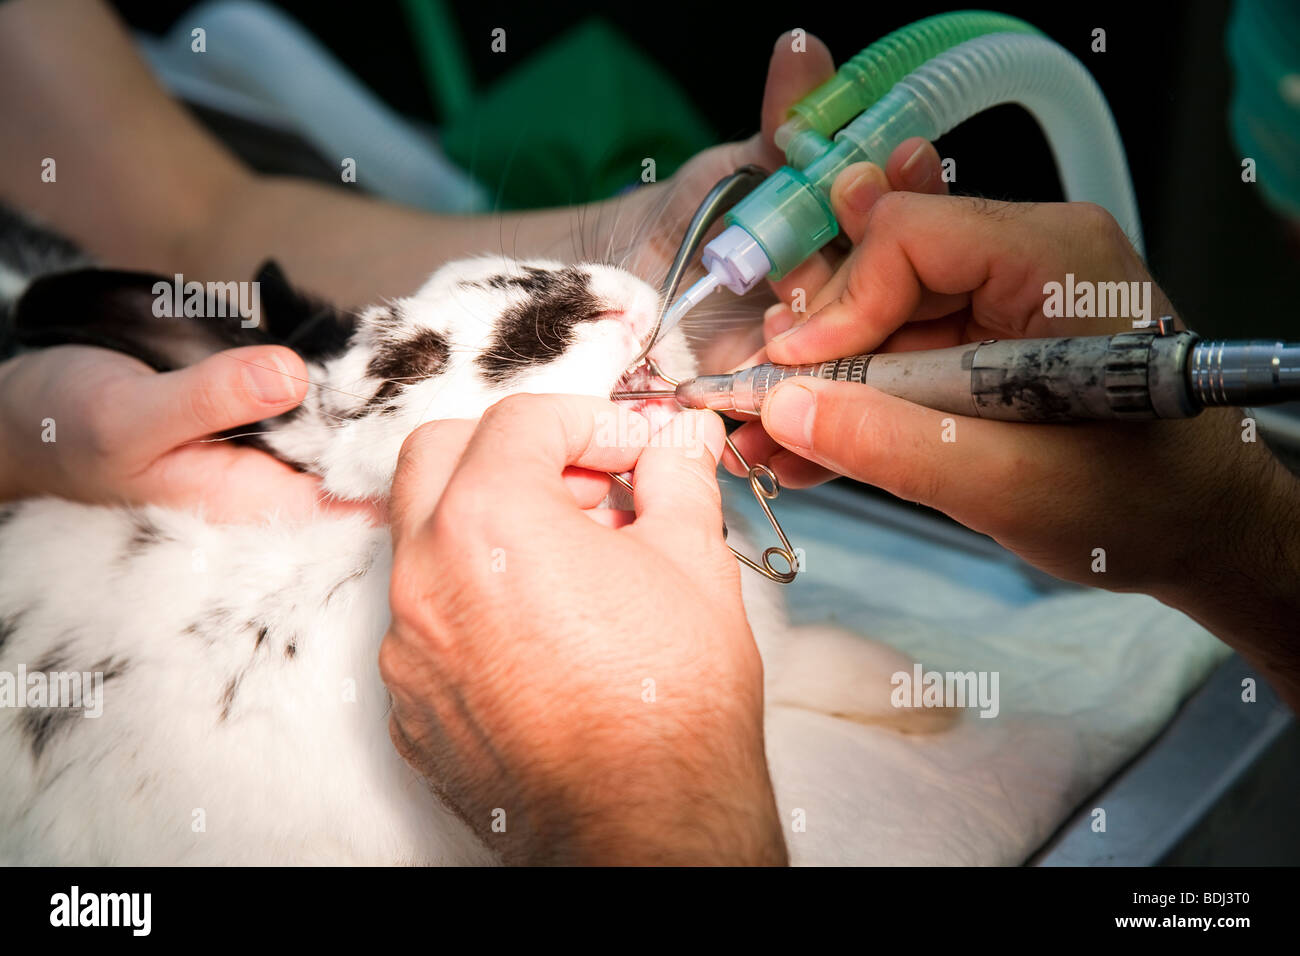 Dental Work Being Carried Out on a Pet Rabbit Stock Photo